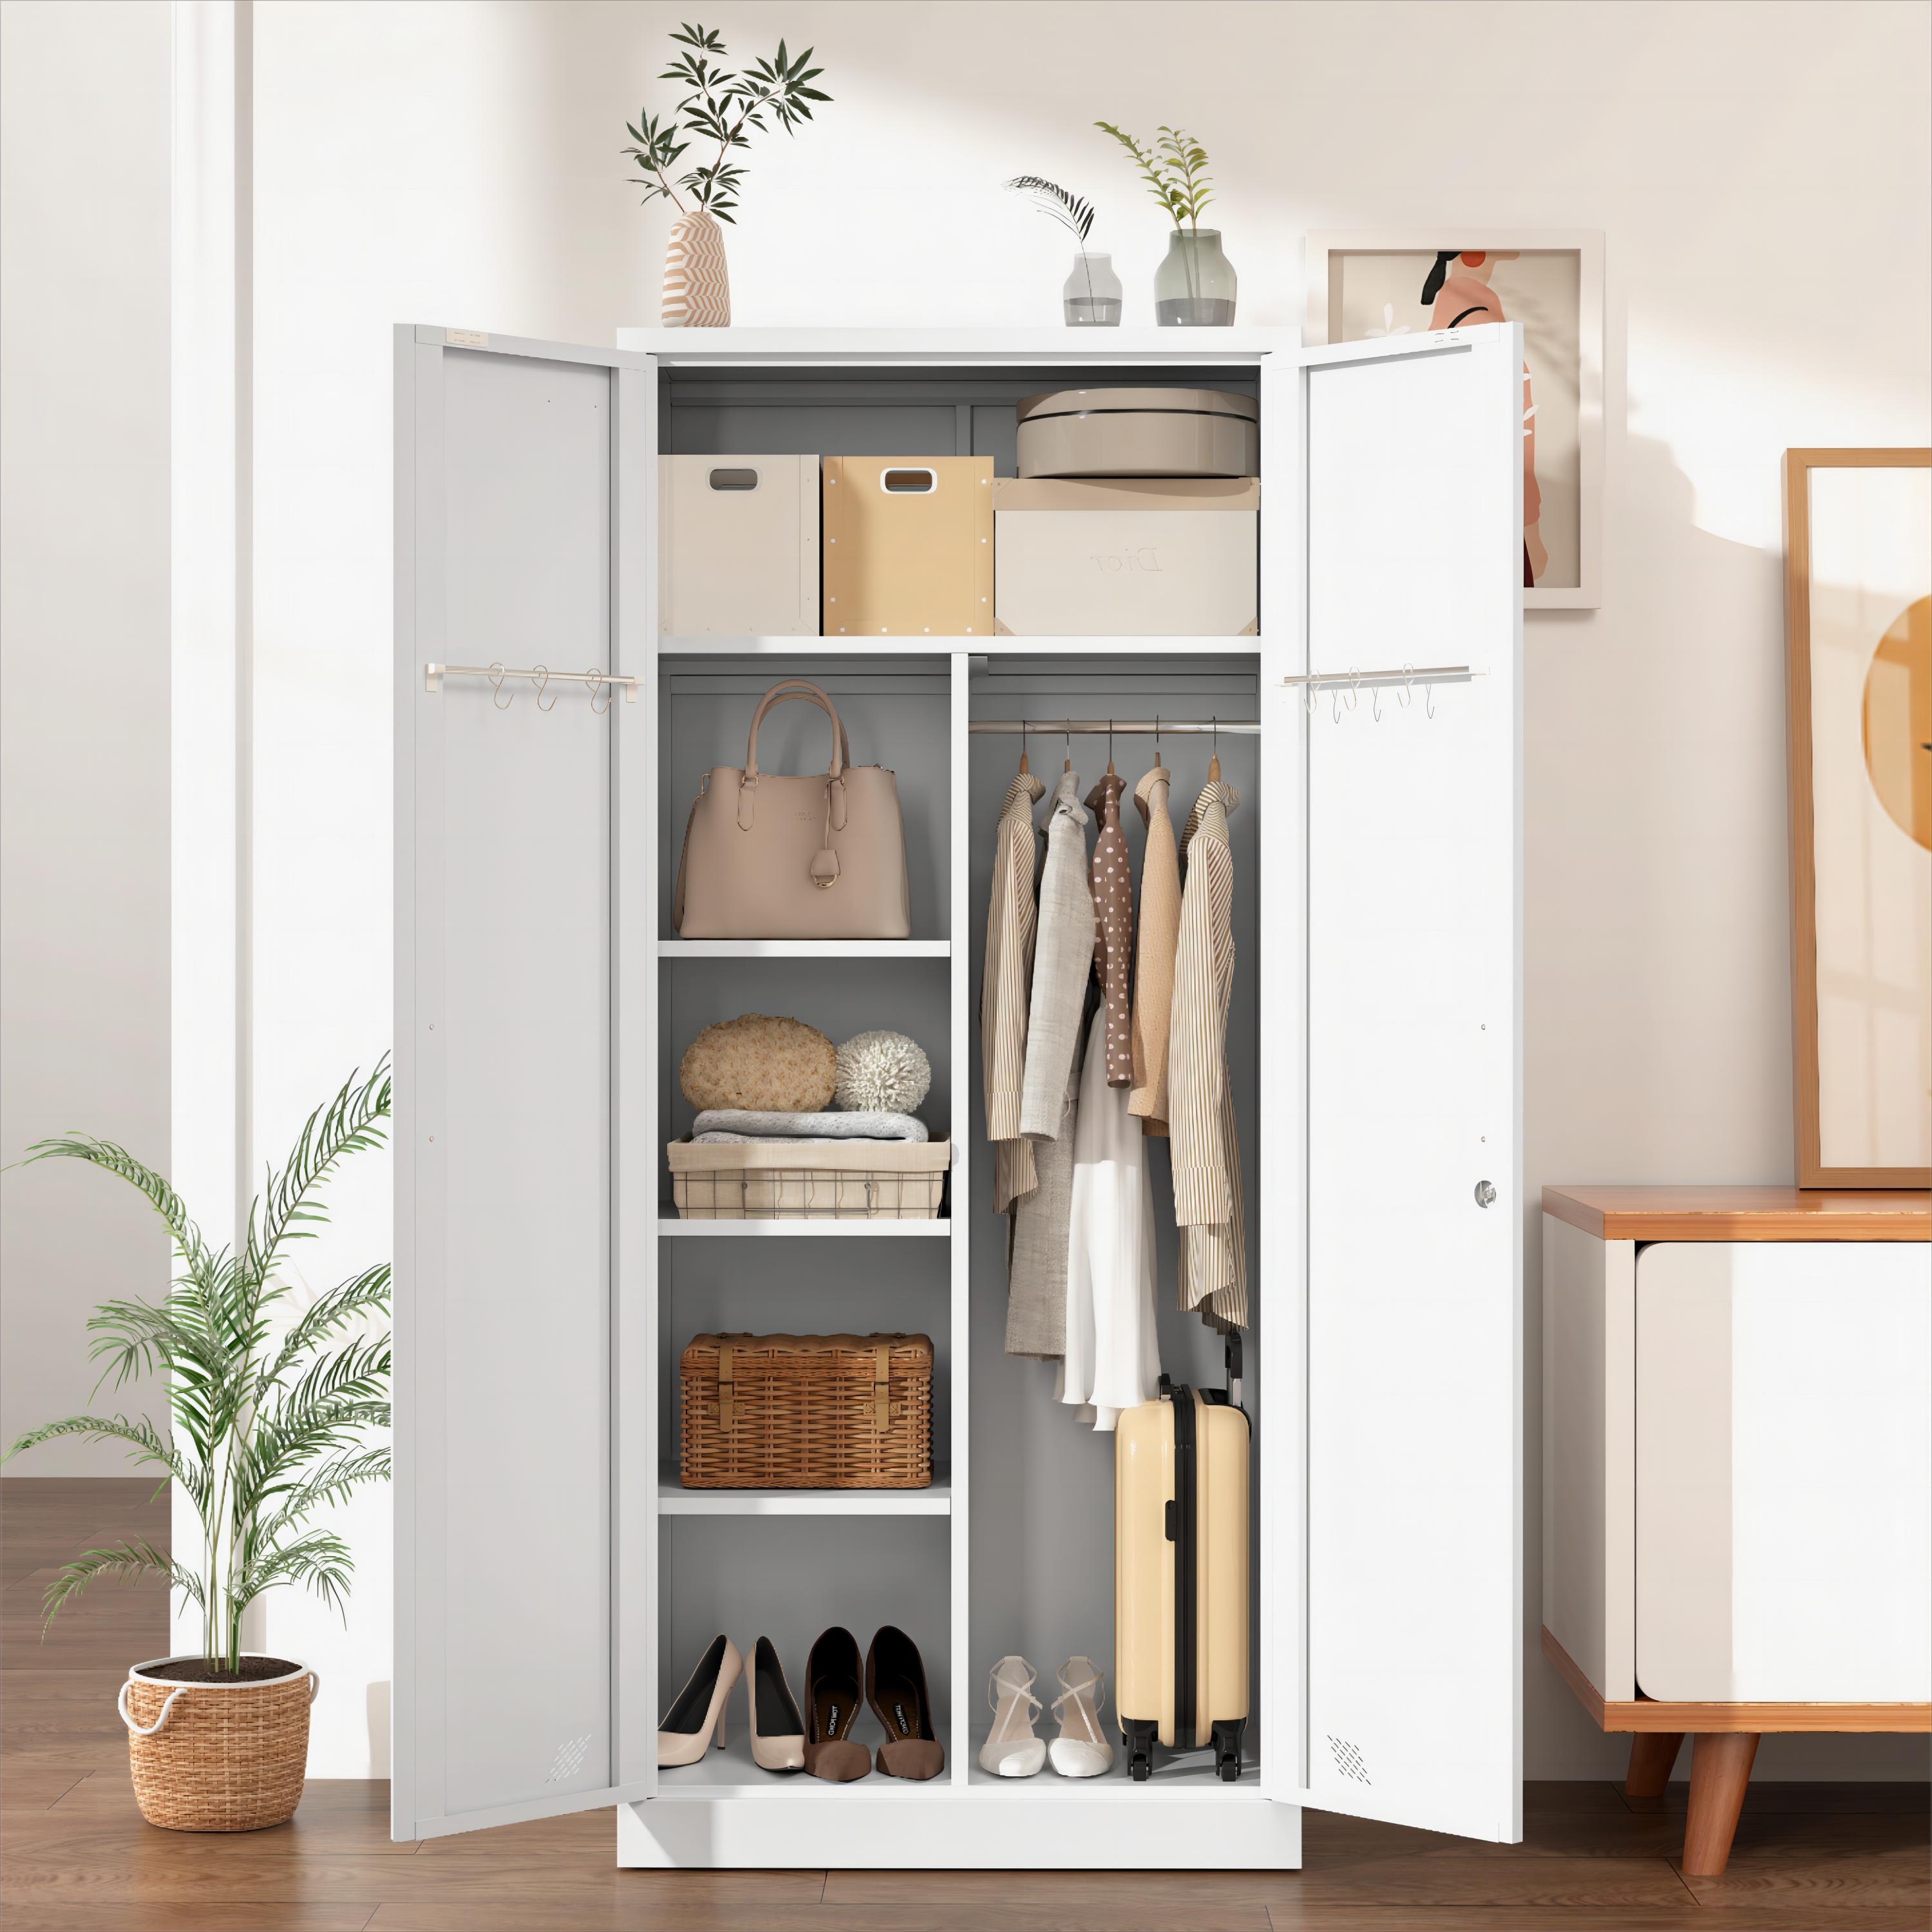 https://ak1.ostkcdn.com/images/products/is/images/direct/0b9f7df6099f6843c6bdf25b6e9cd7e3faa8492e/GEITIN-Modern-Freestanding-Wardrobe-Armoire-with-Metal-Handle.jpg